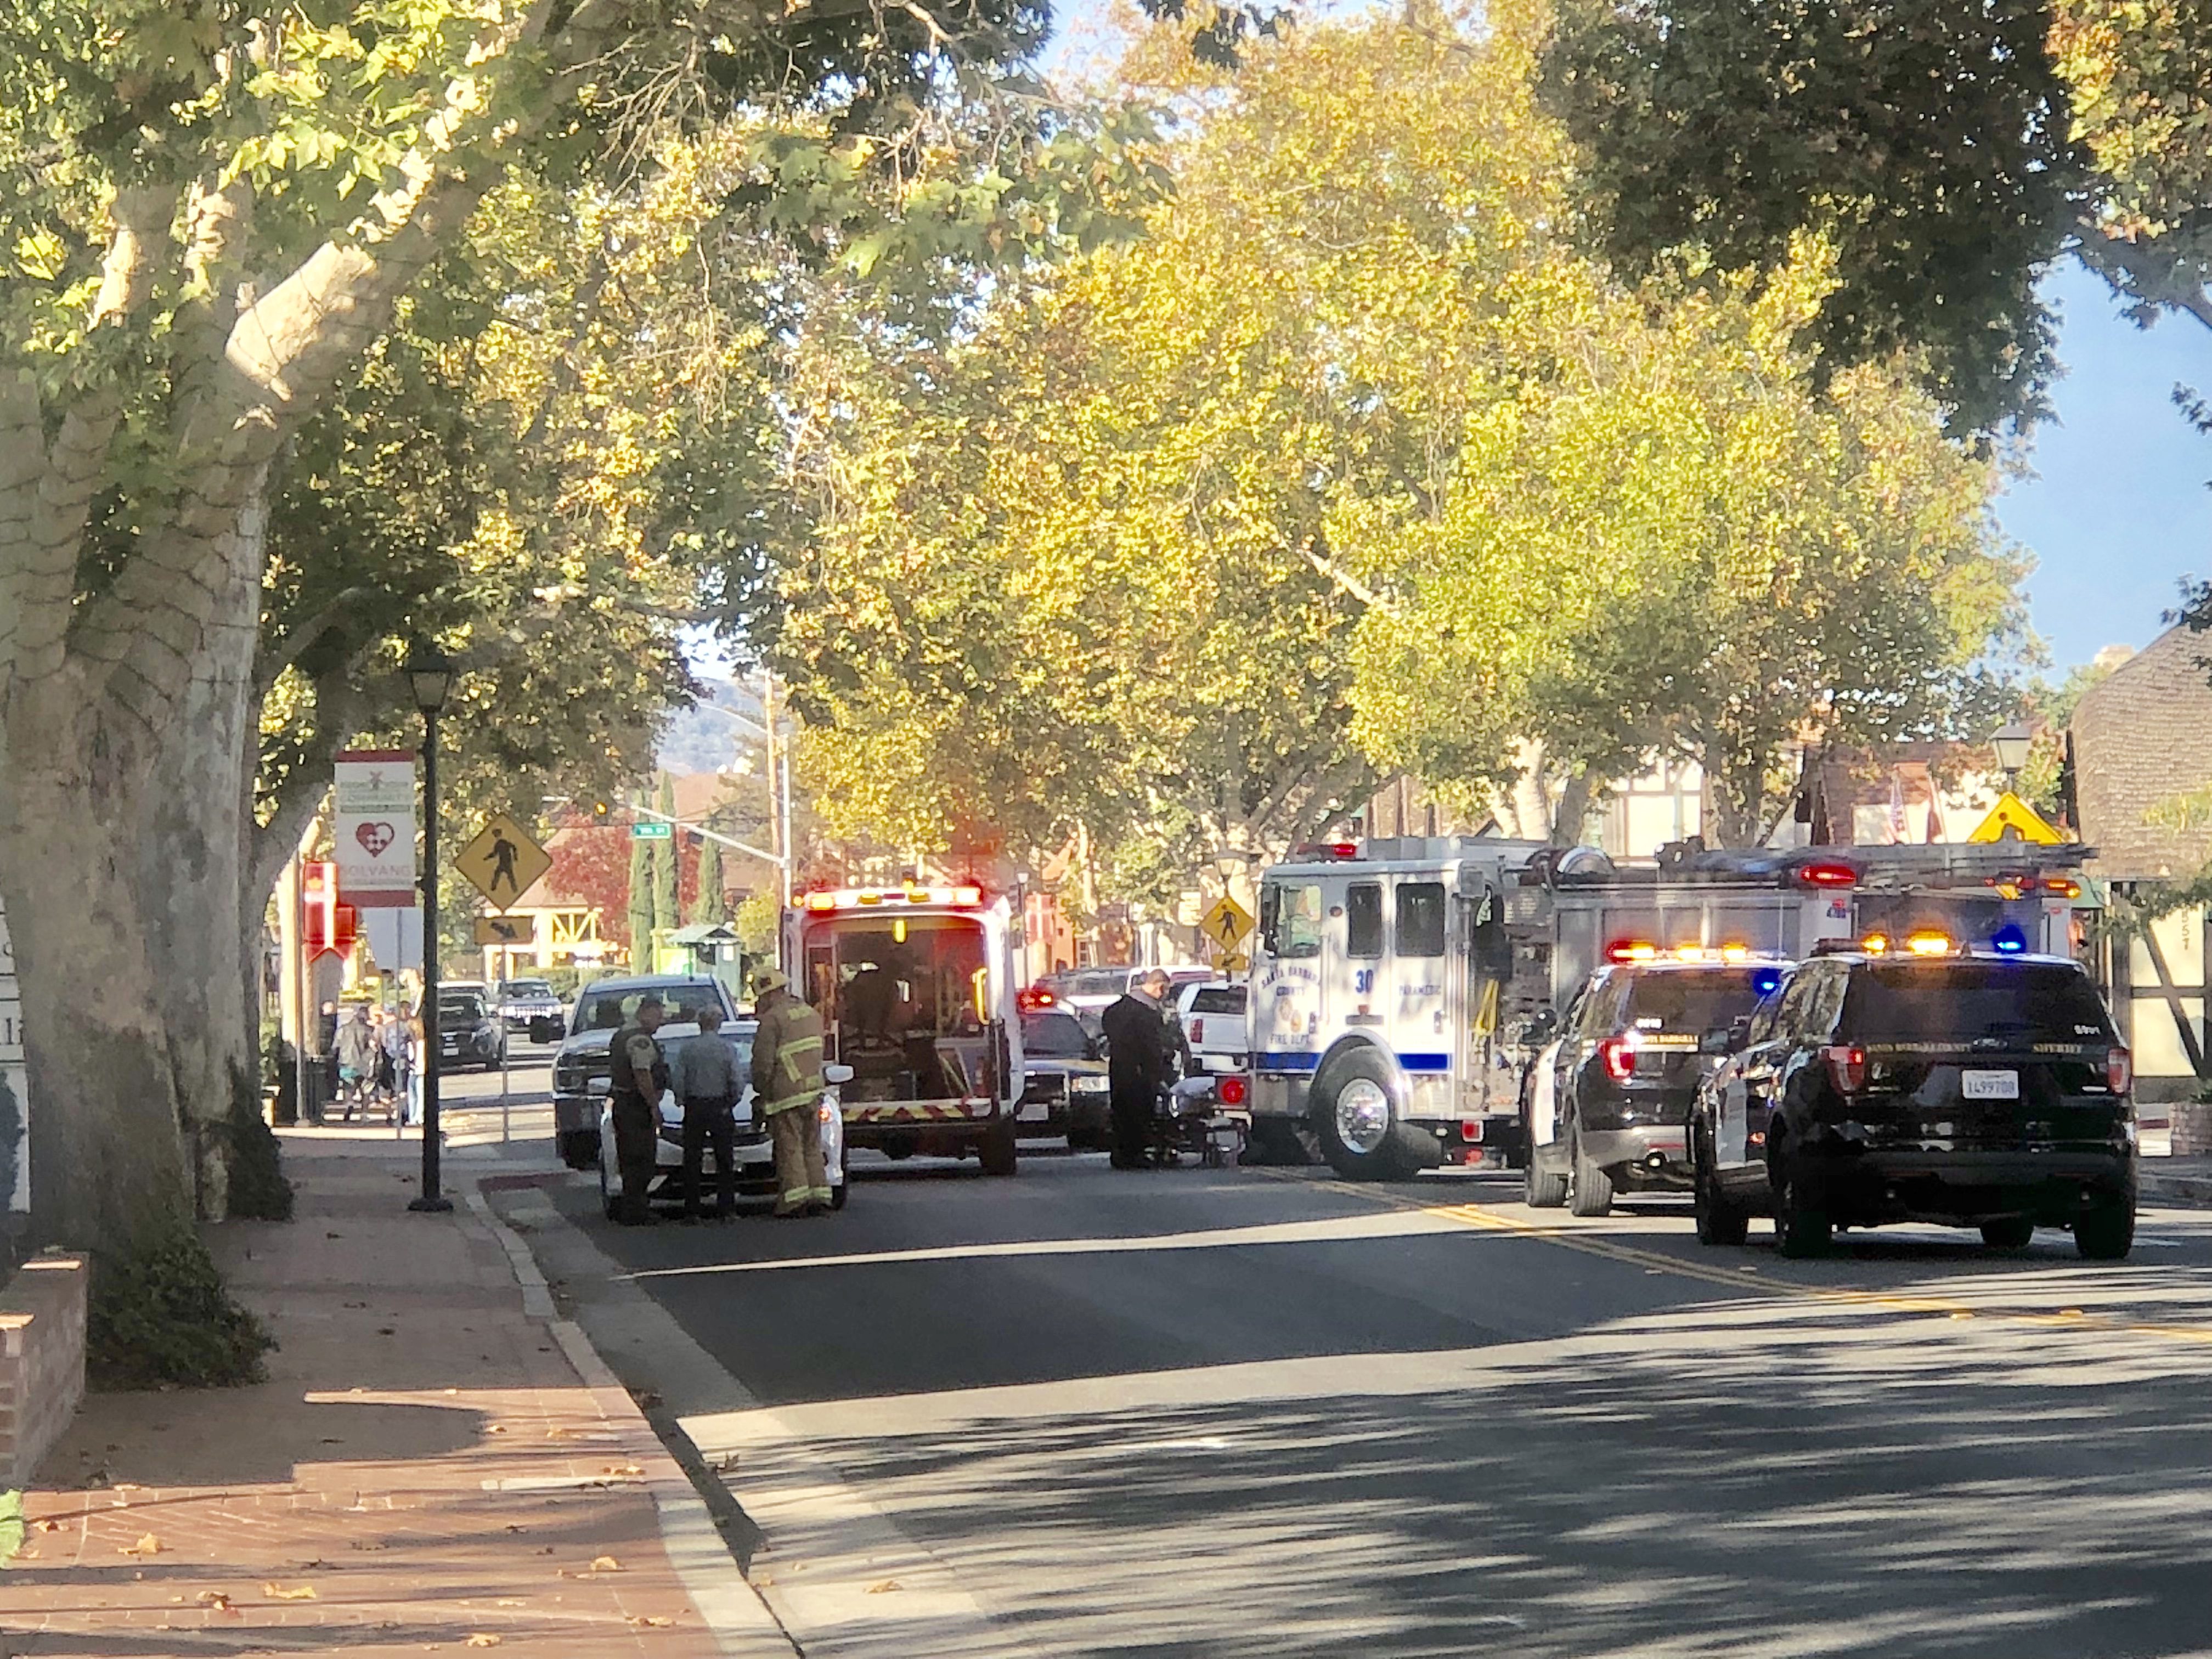 70 year-old woman struck in crosswalk in Solvang, suffers serious injuries